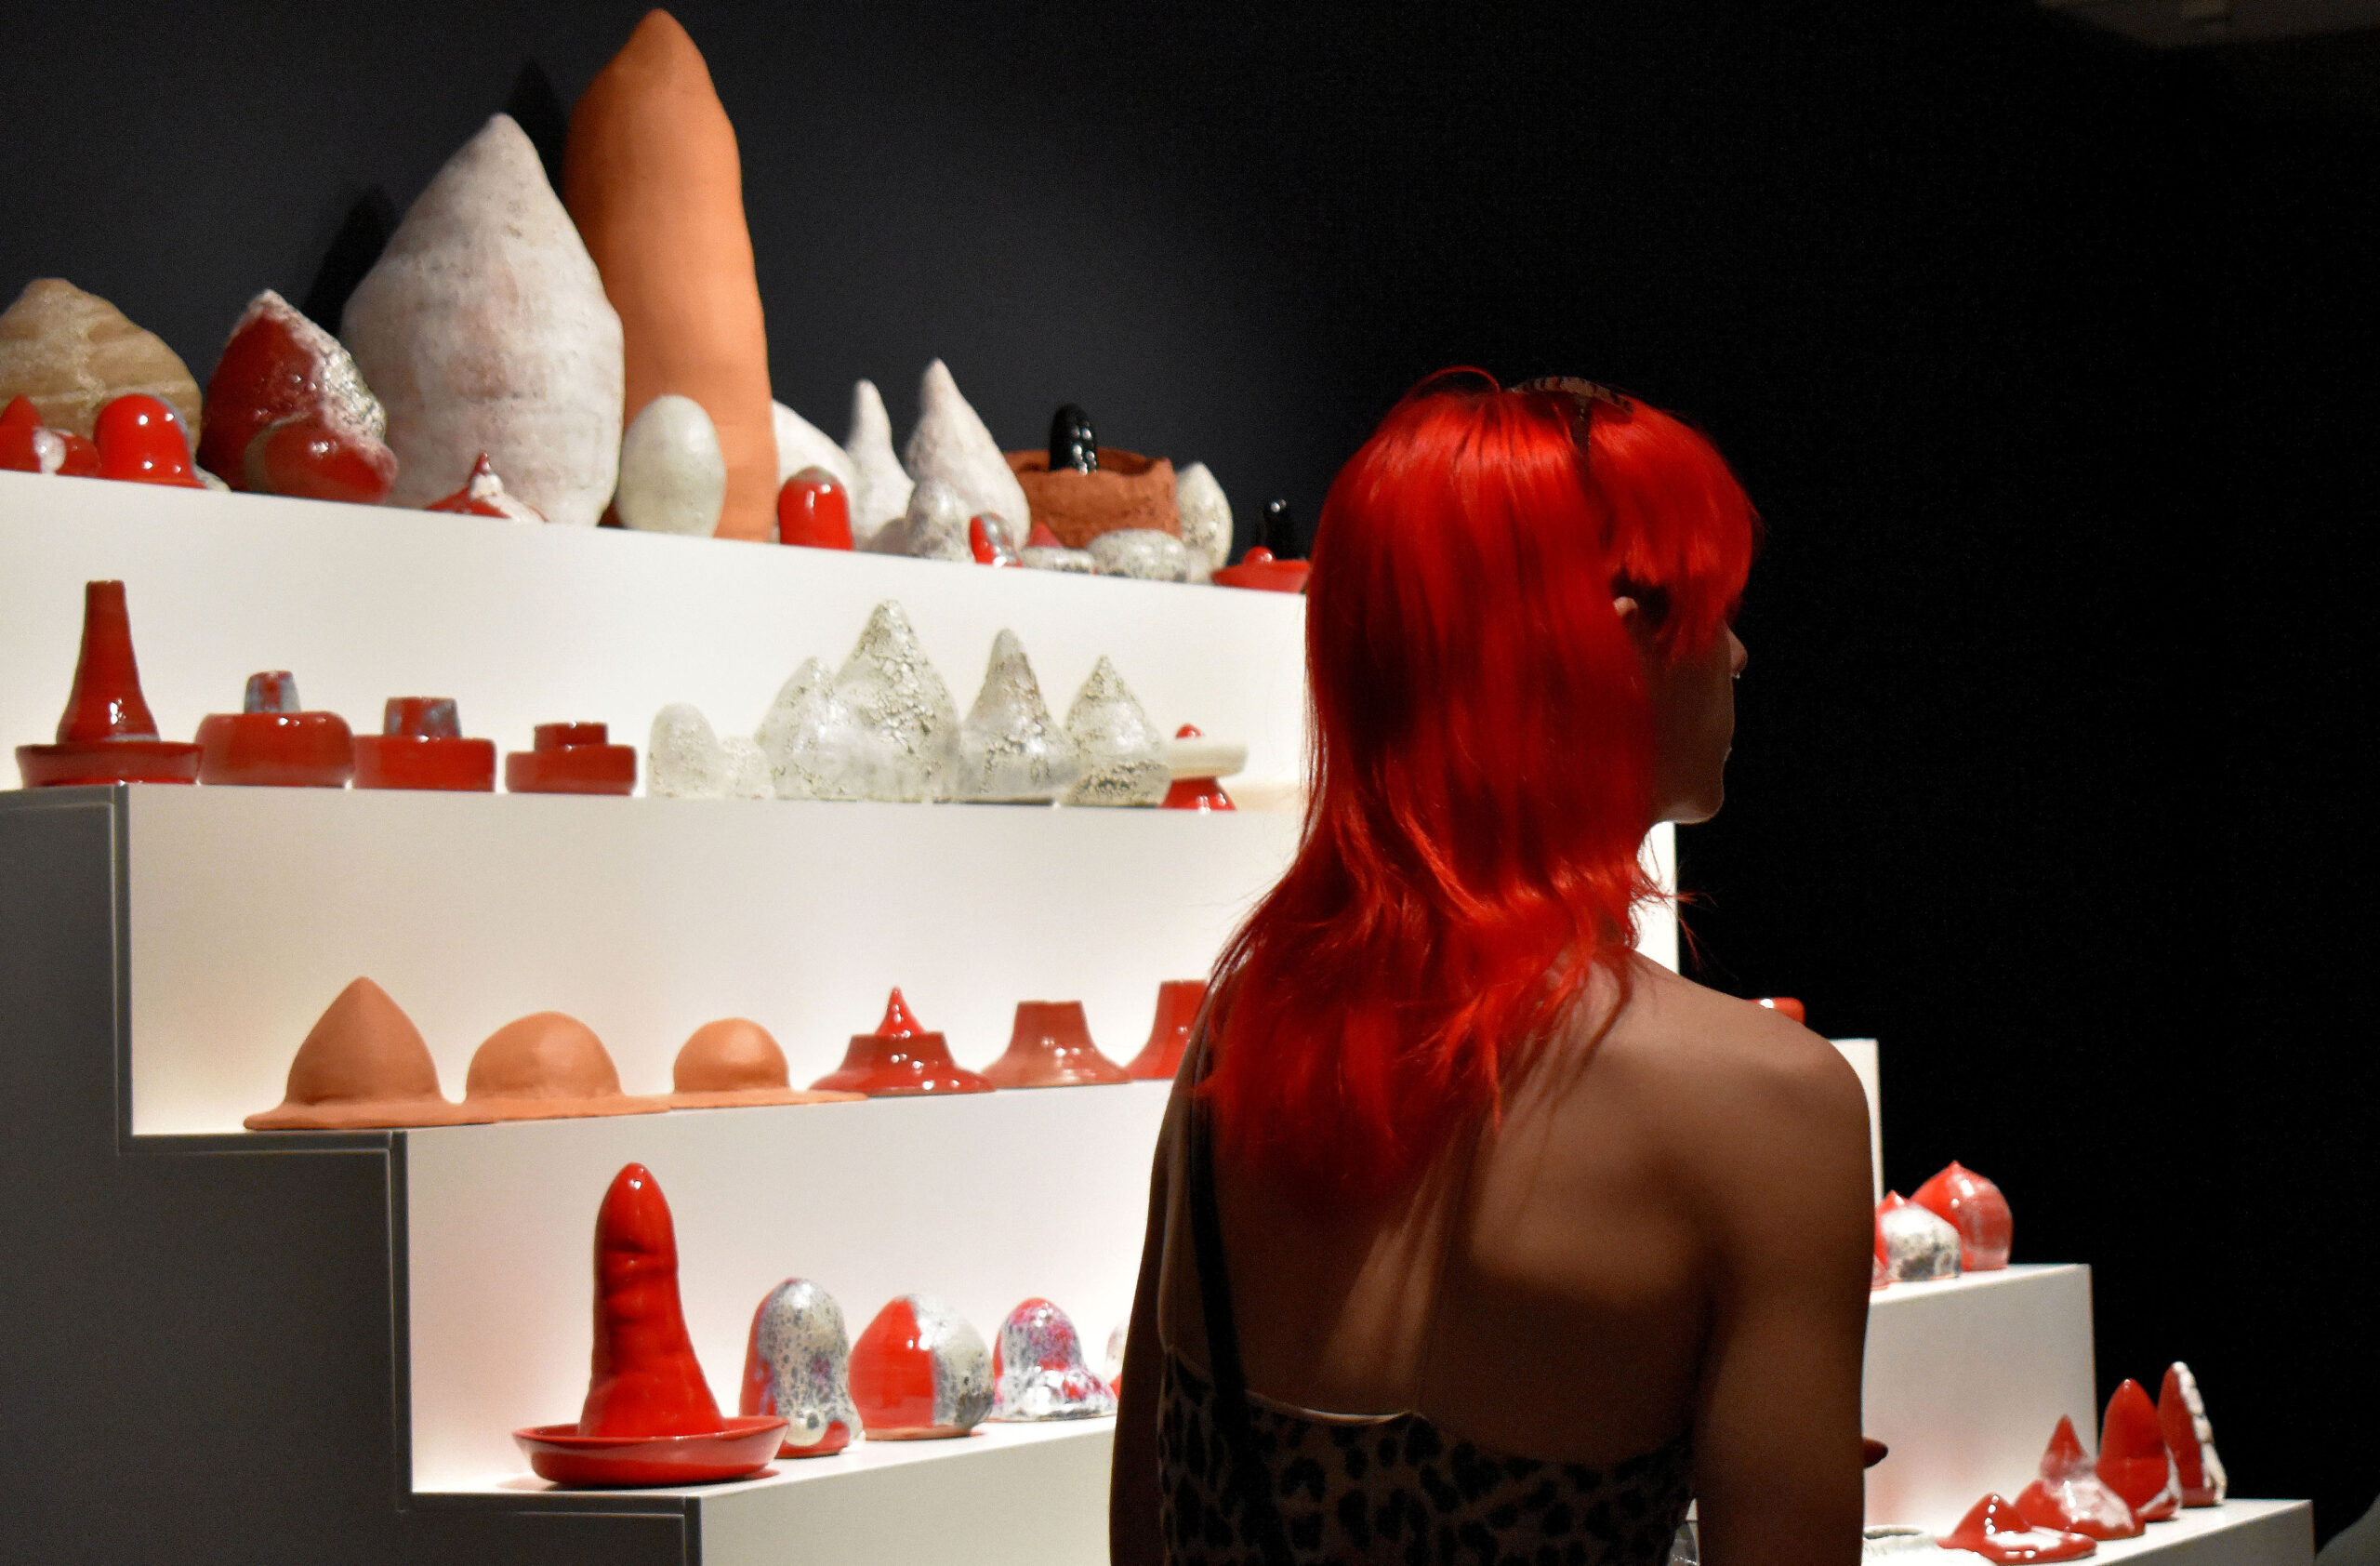 Woman with red hair stands in front of a display of objects